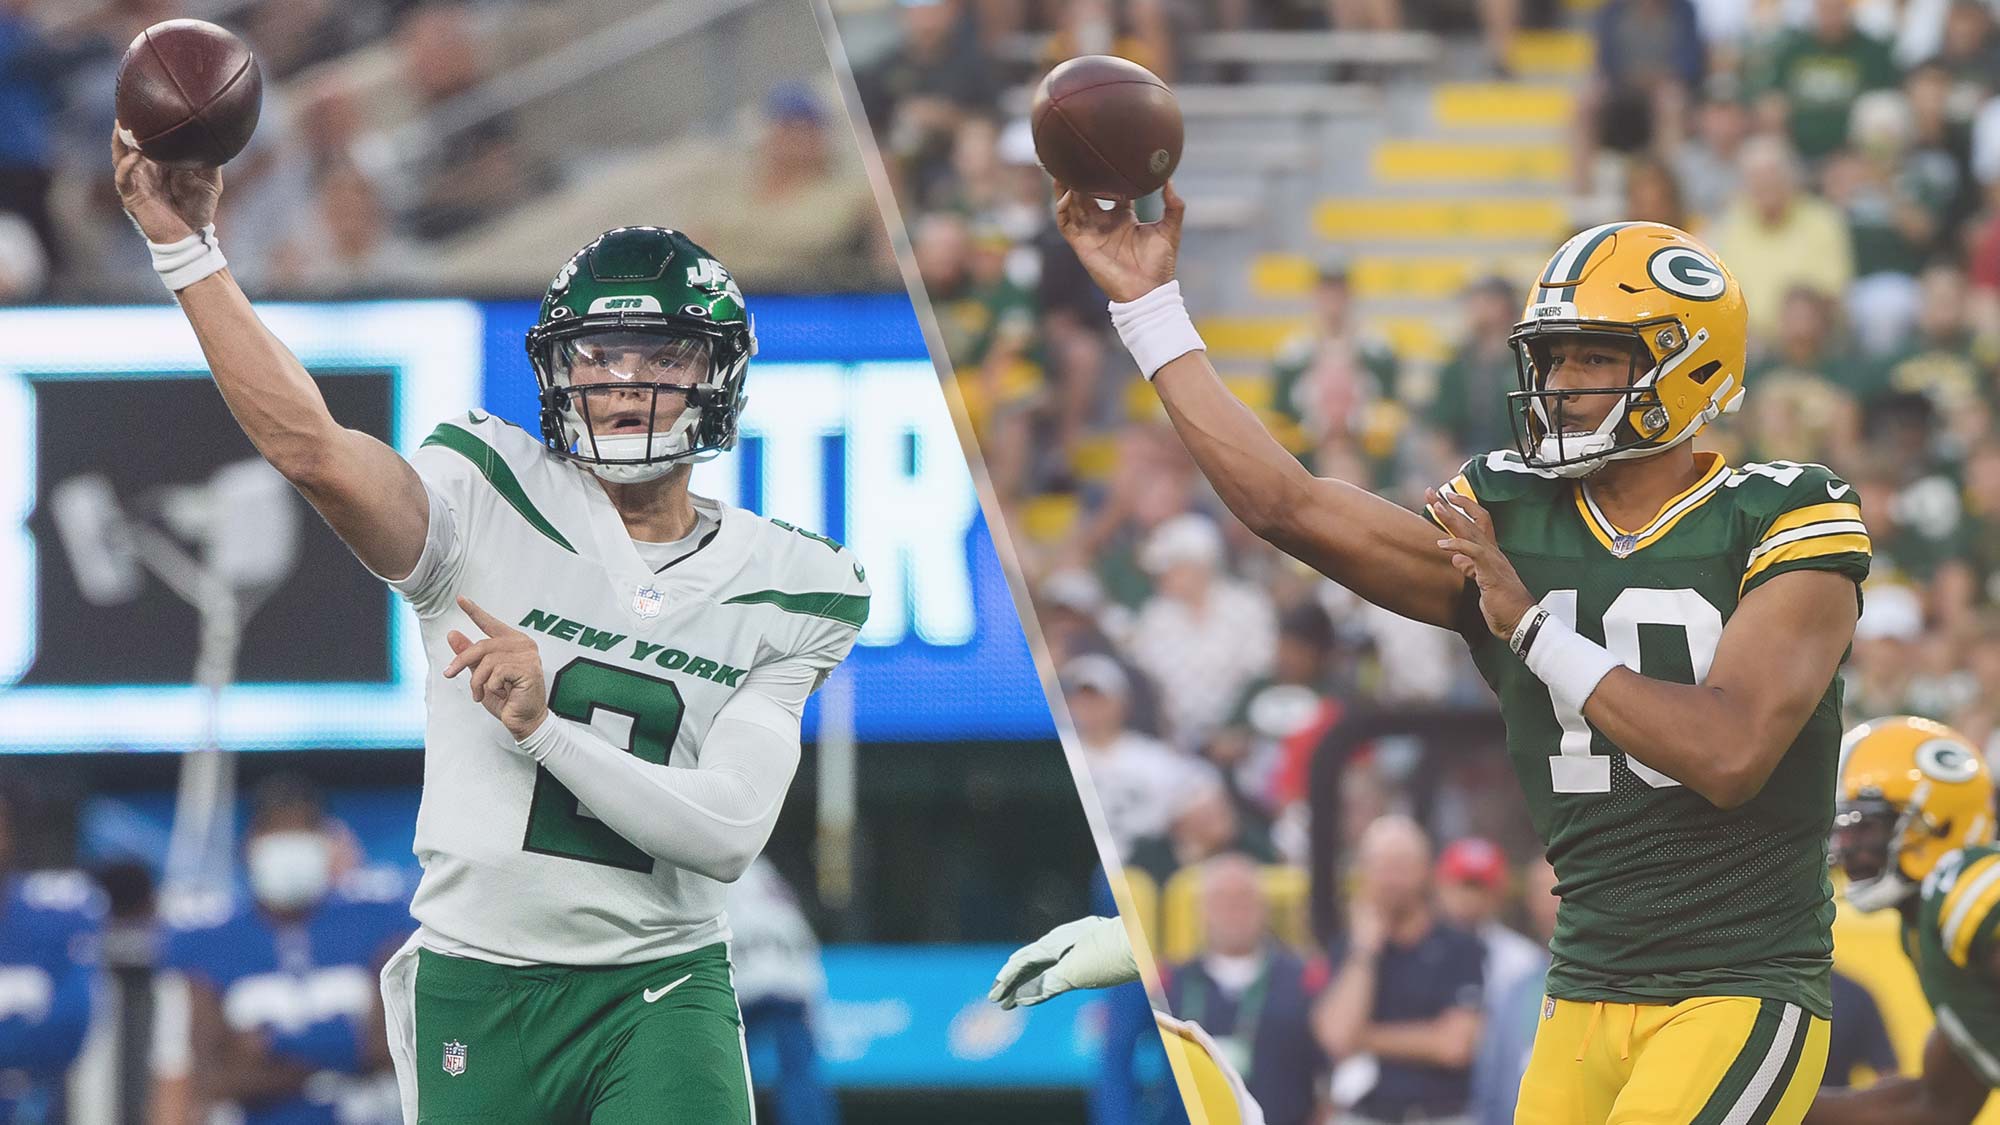 Jets vs Packers live stream: How to watch 2021 NFL preseason game